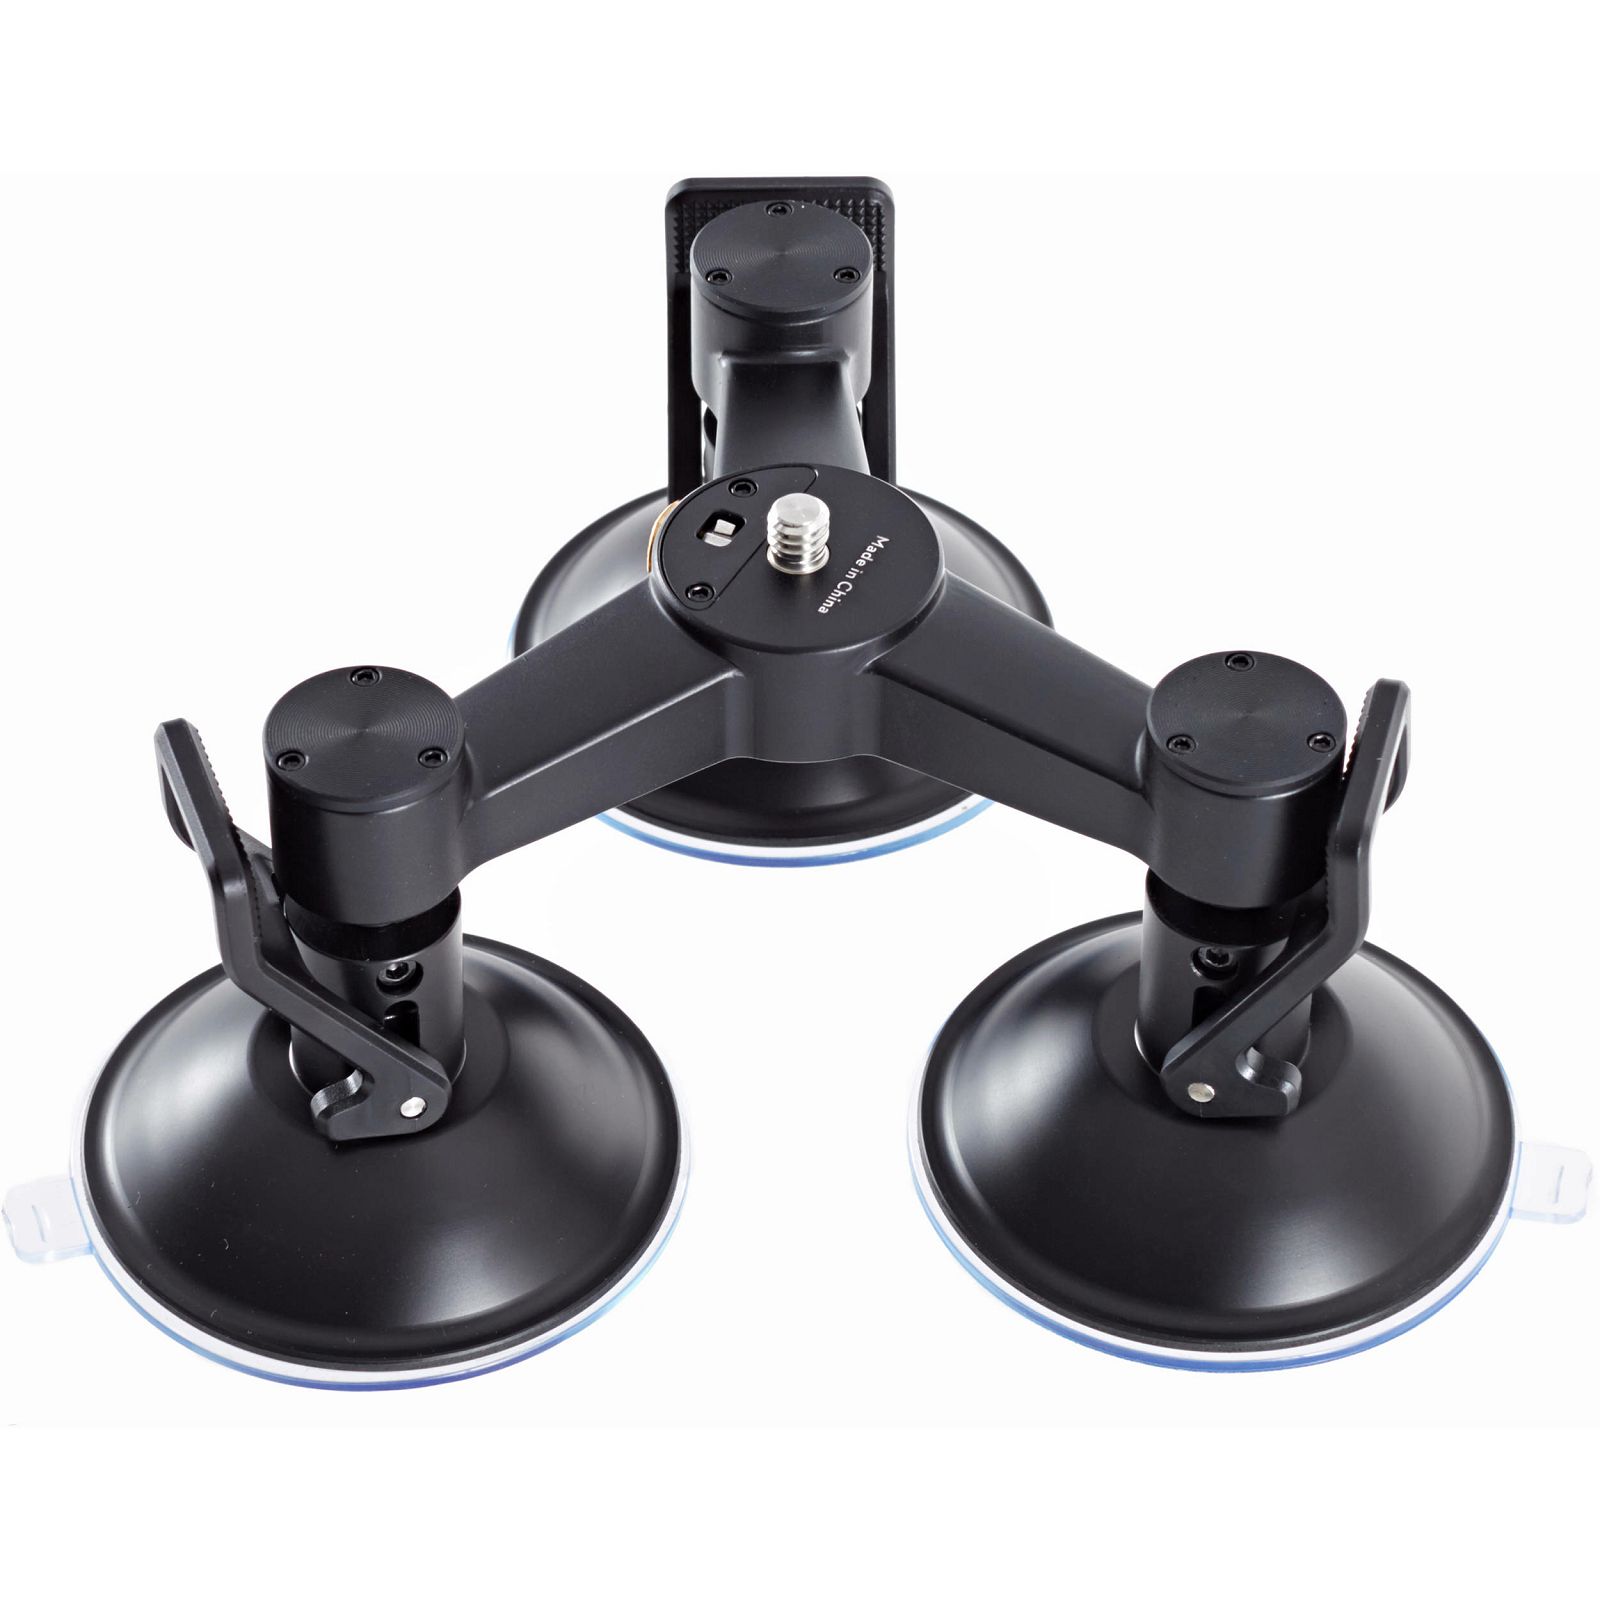 DJI Osmo Spare Part 36 Triple Mount Suction Cup Base